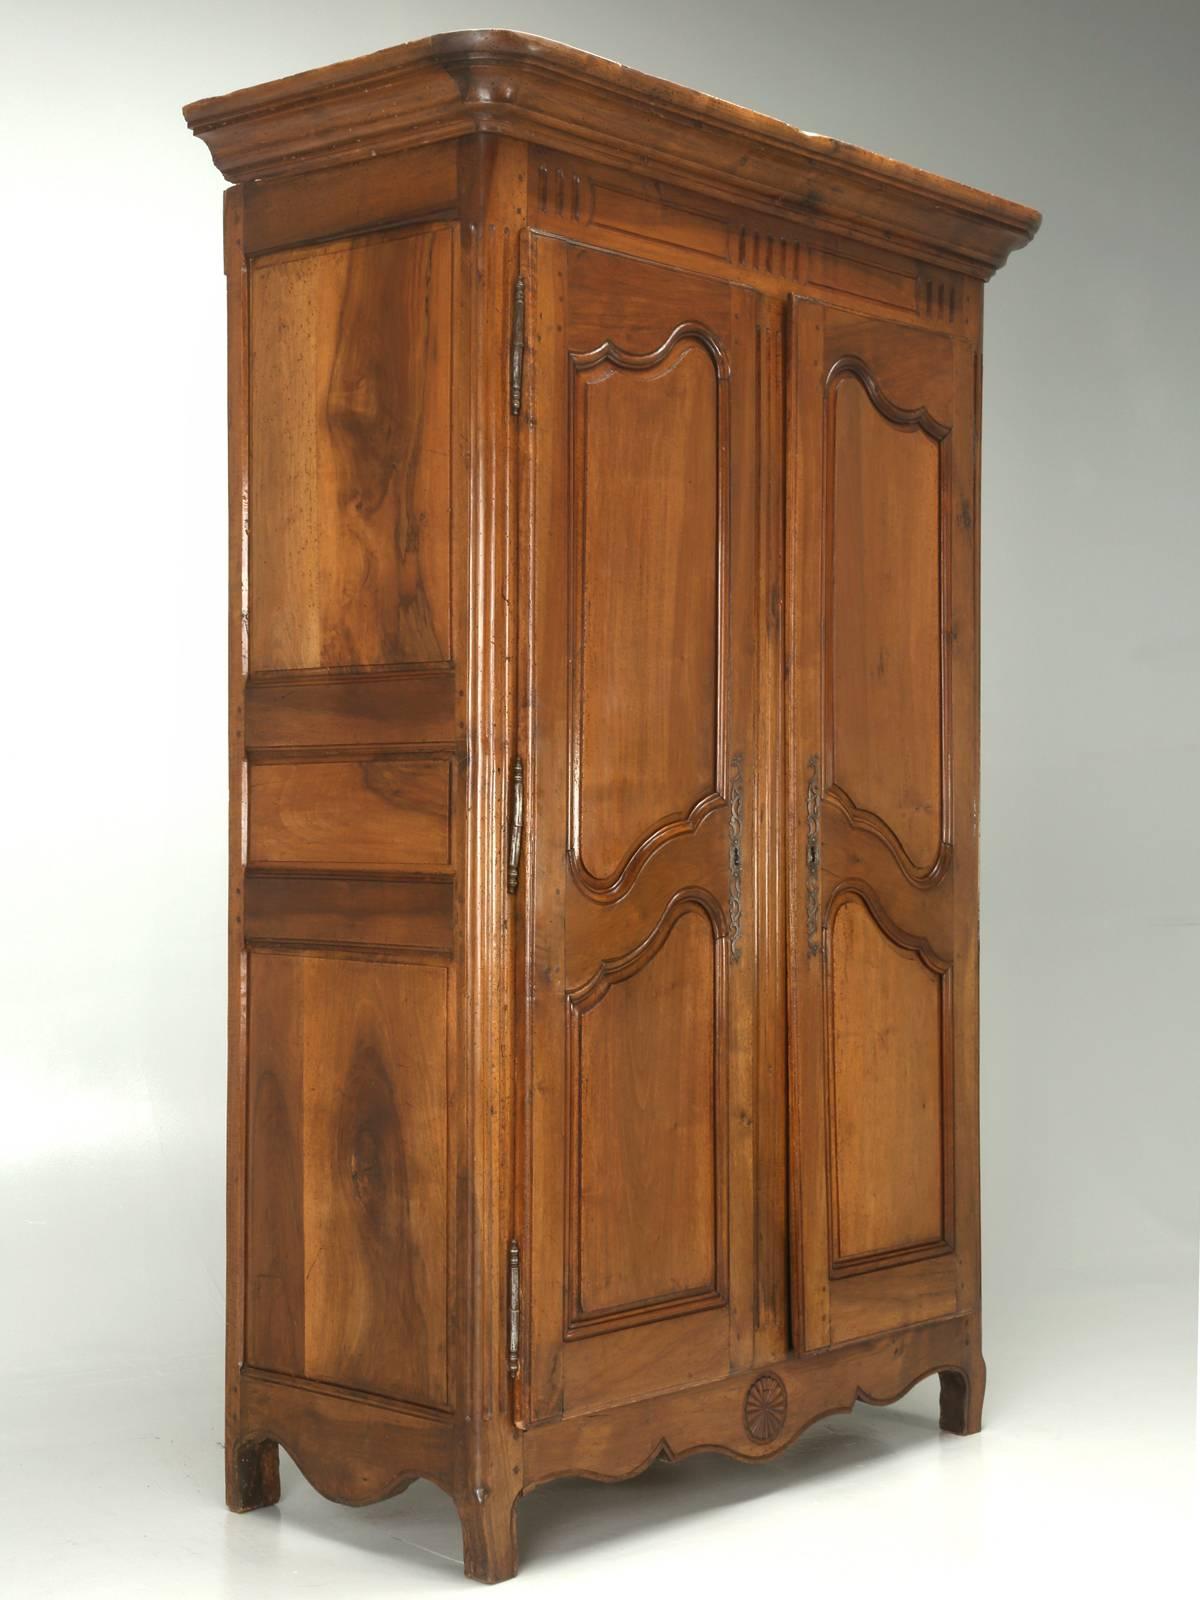 Antique French 18th century solid Walnut Armoire. We located this Antique French Armoire in the Toulouse region of France and really, only had to spend a few days in our Old Plank workshop, before offering the French Armoire for sale. We went